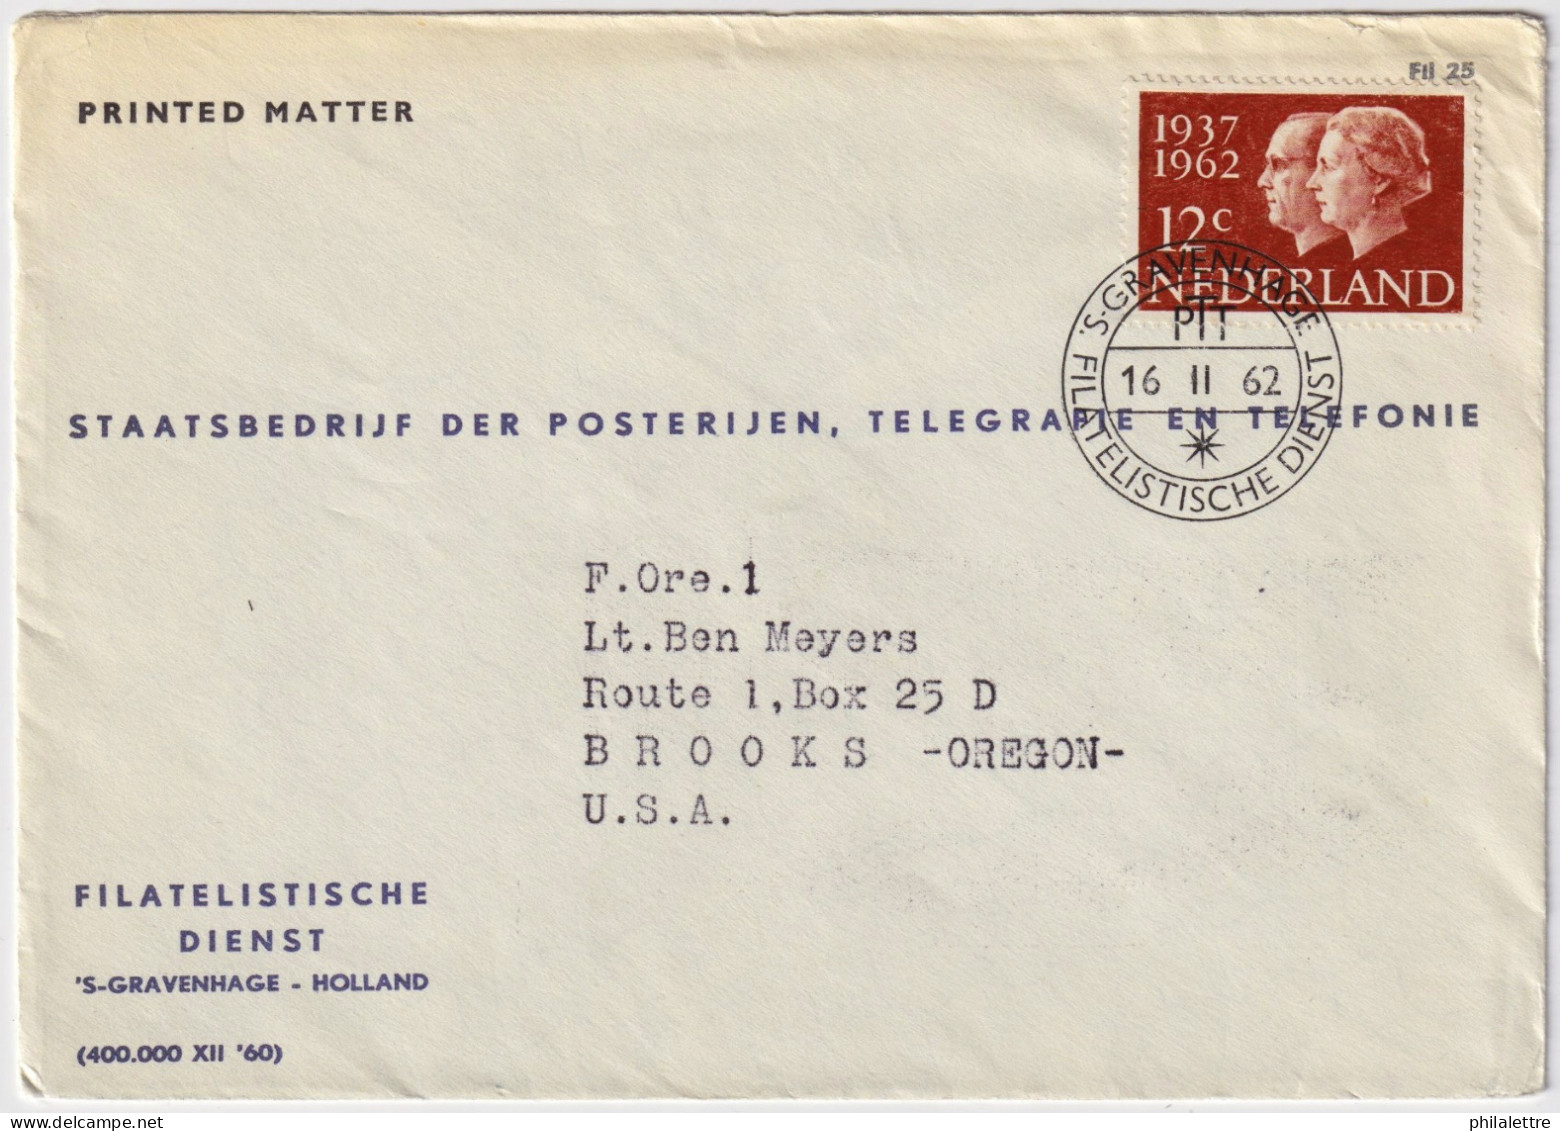 PAYS-BAS / THE NETHERLANDS - 1962 Mi.772 On PTT Cover From 'S-GRAVENHAGE To BROOKS, Oregon, USA - Lettres & Documents